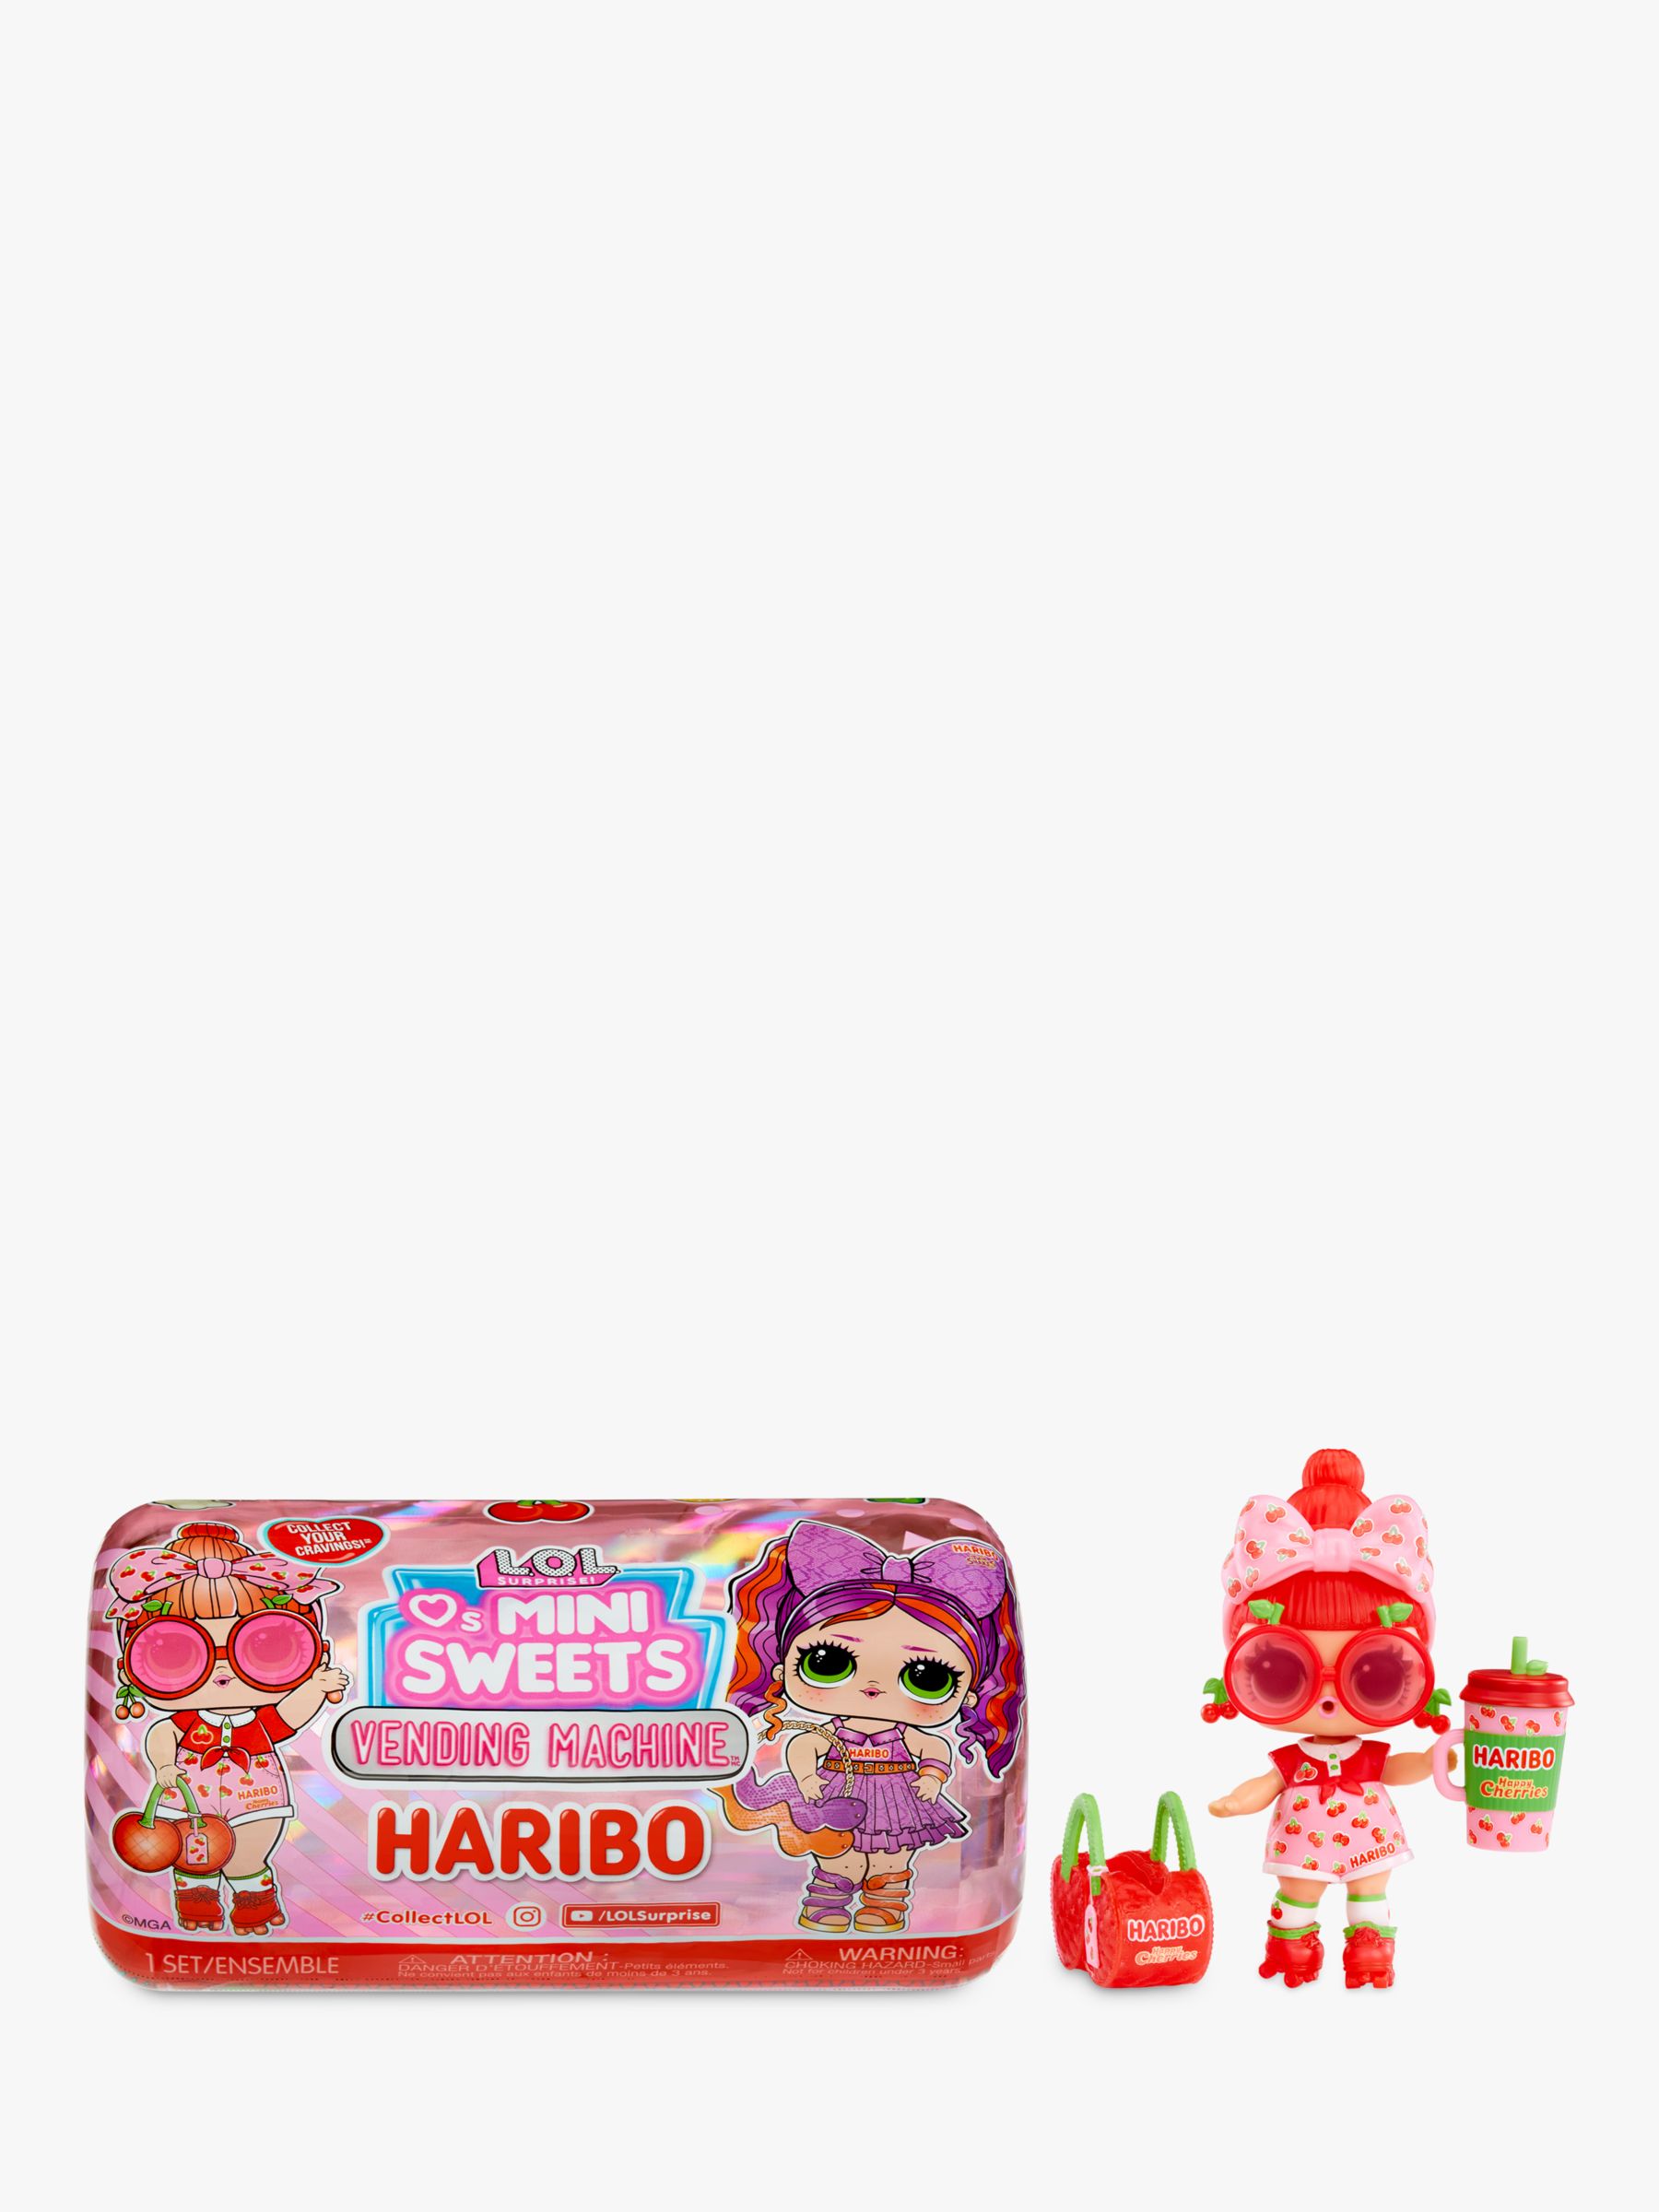 MGA, Haribo Partner for New L.O.L. Surprise! Dolls - The Toy Book